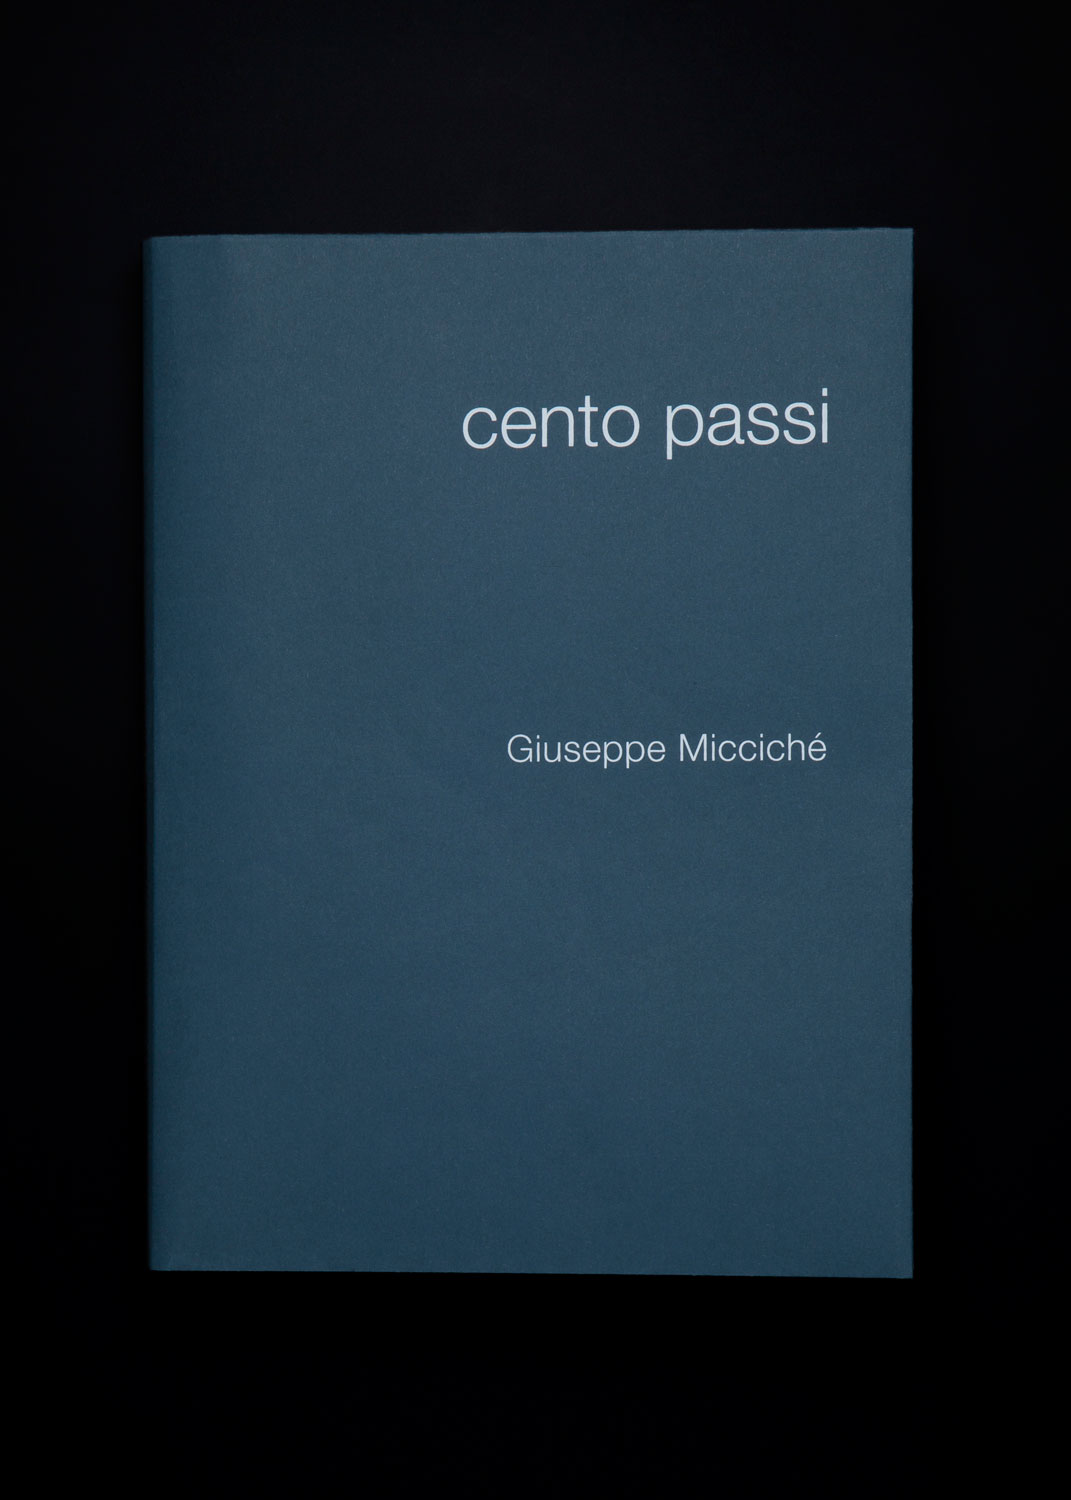 'Cento passi', series of photographies